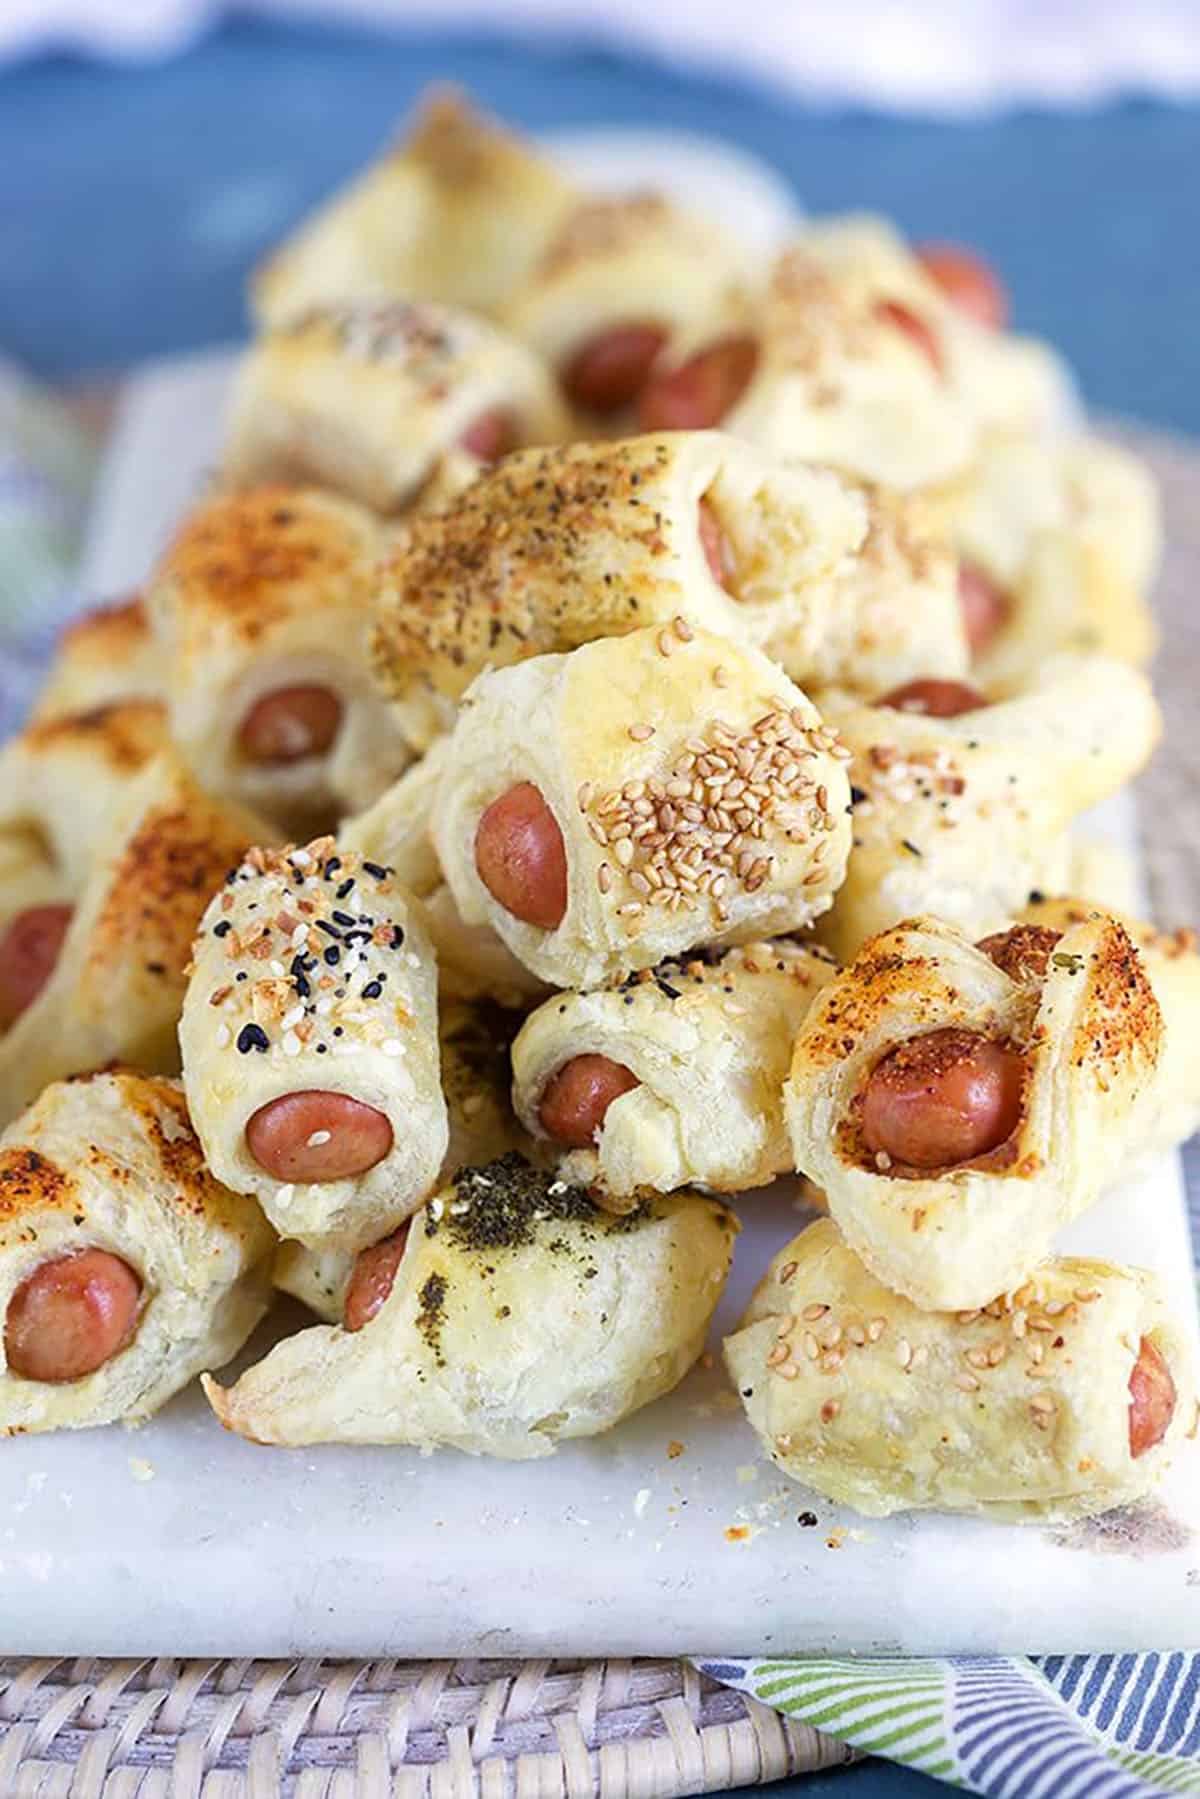 Pile of pigs in a blanket with seasonings on a marble tray.